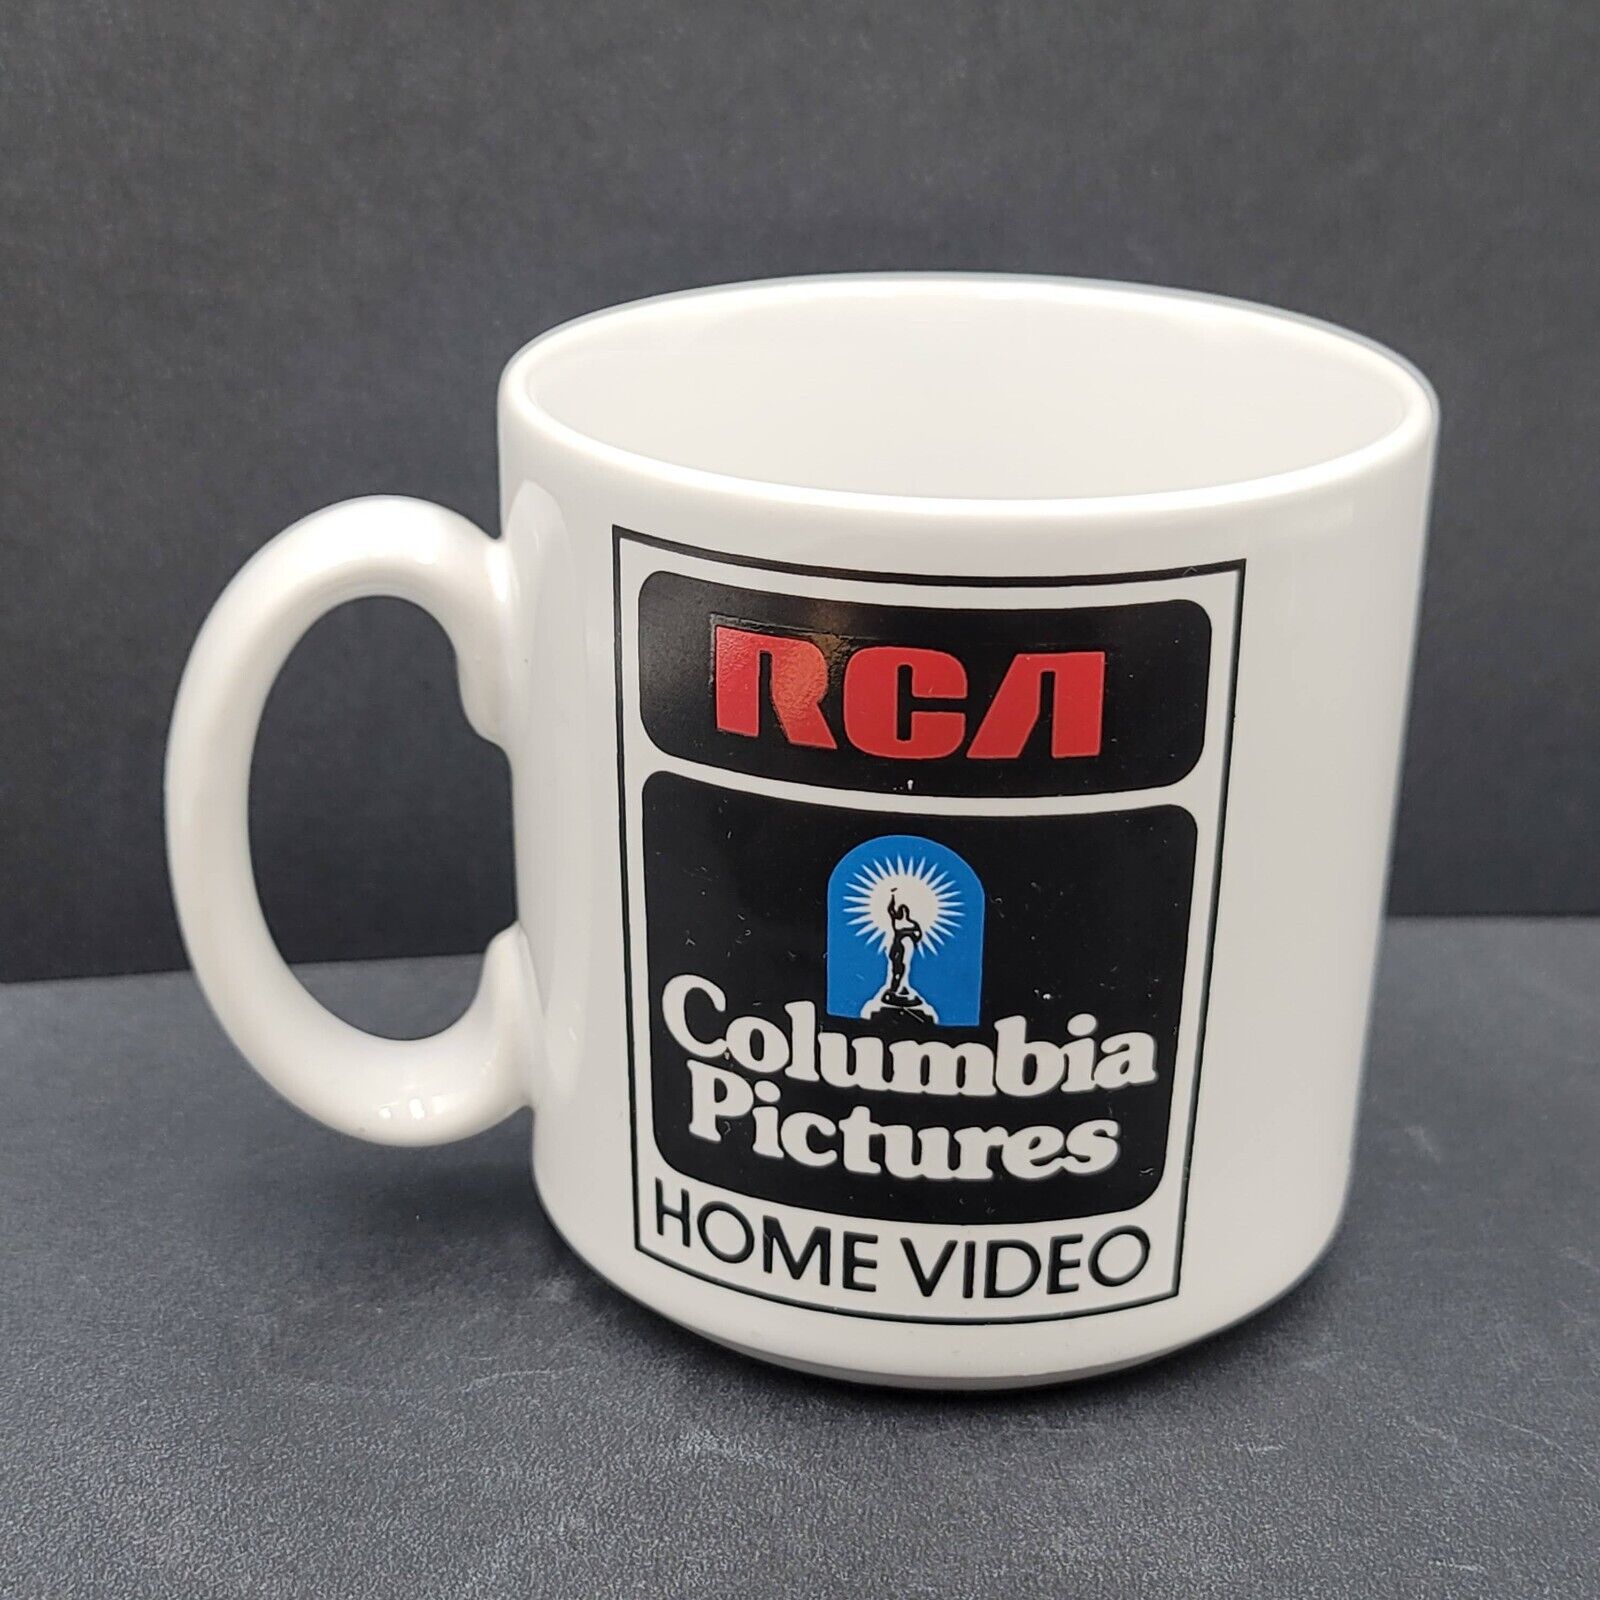 RARE Vintage RCA Columbia Pictures Home Video Coffee Mug Cup